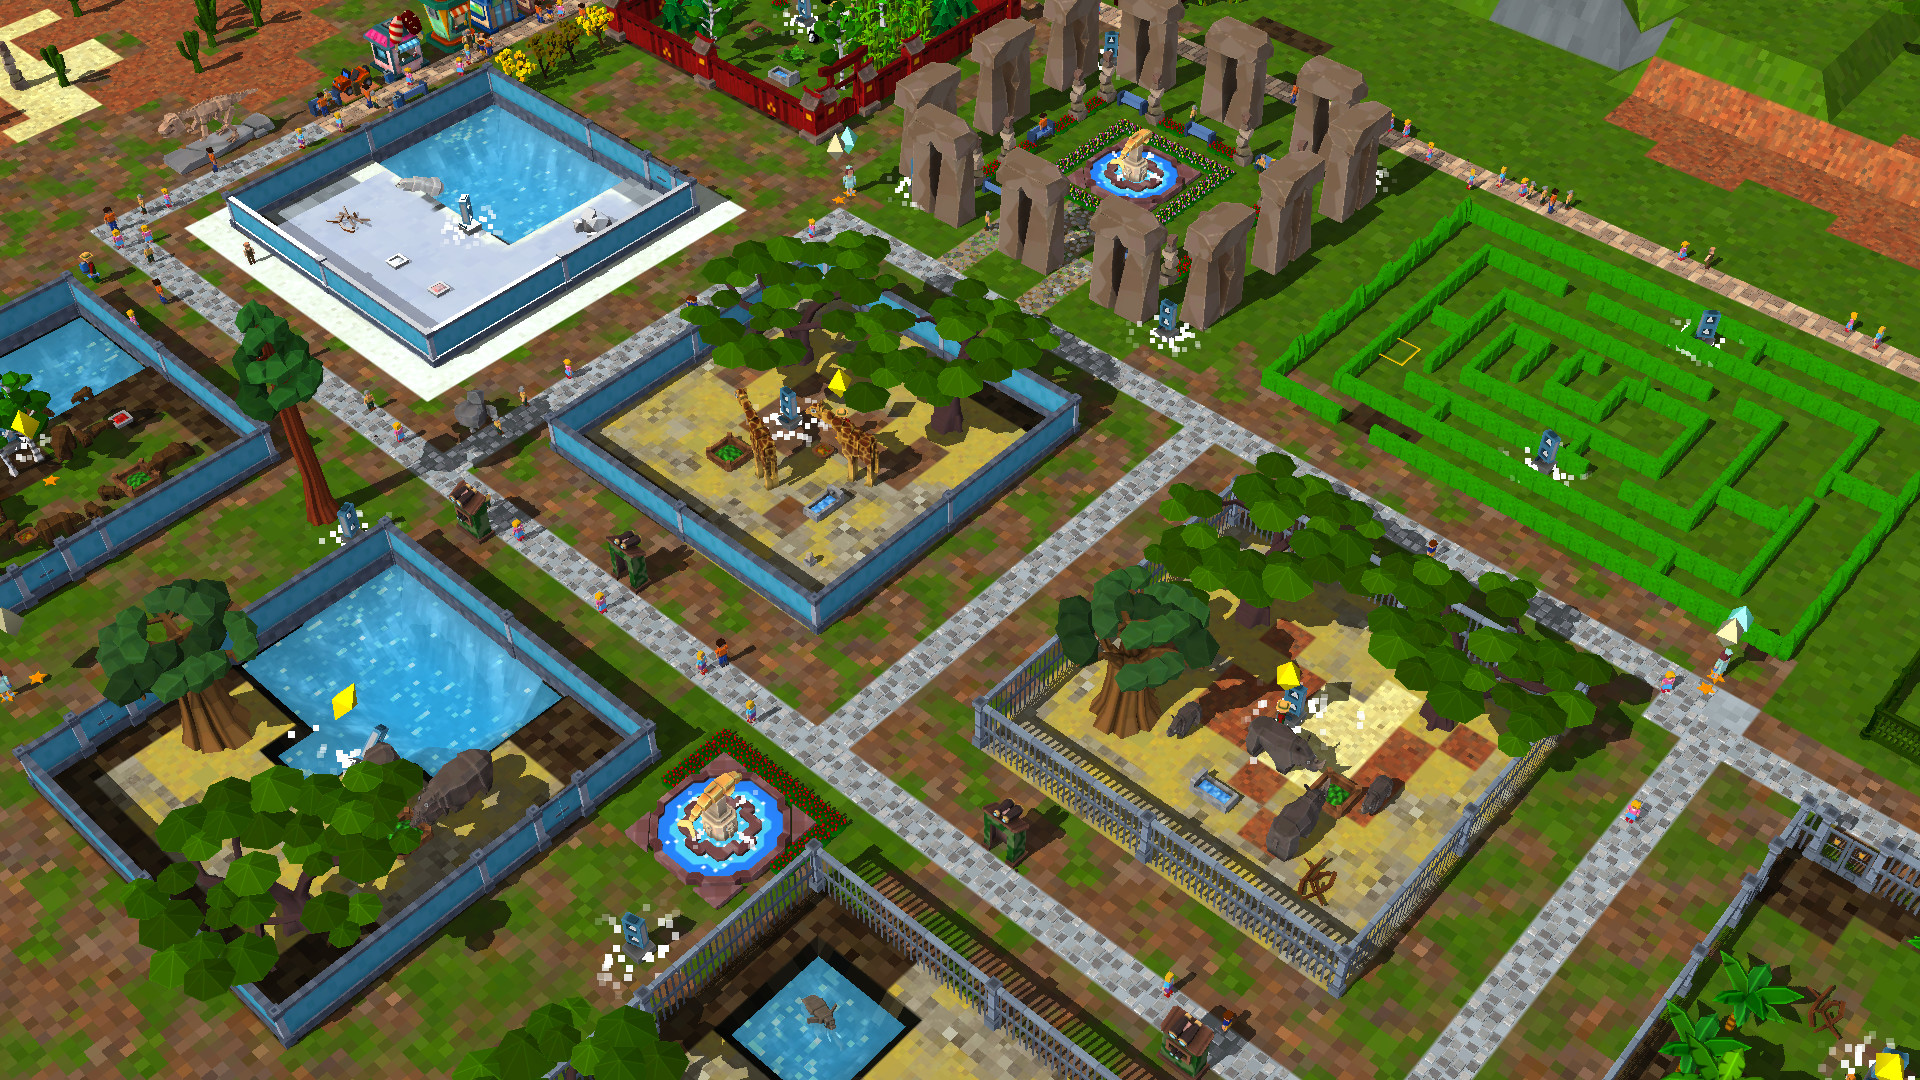 Zoo Constructor Free Download